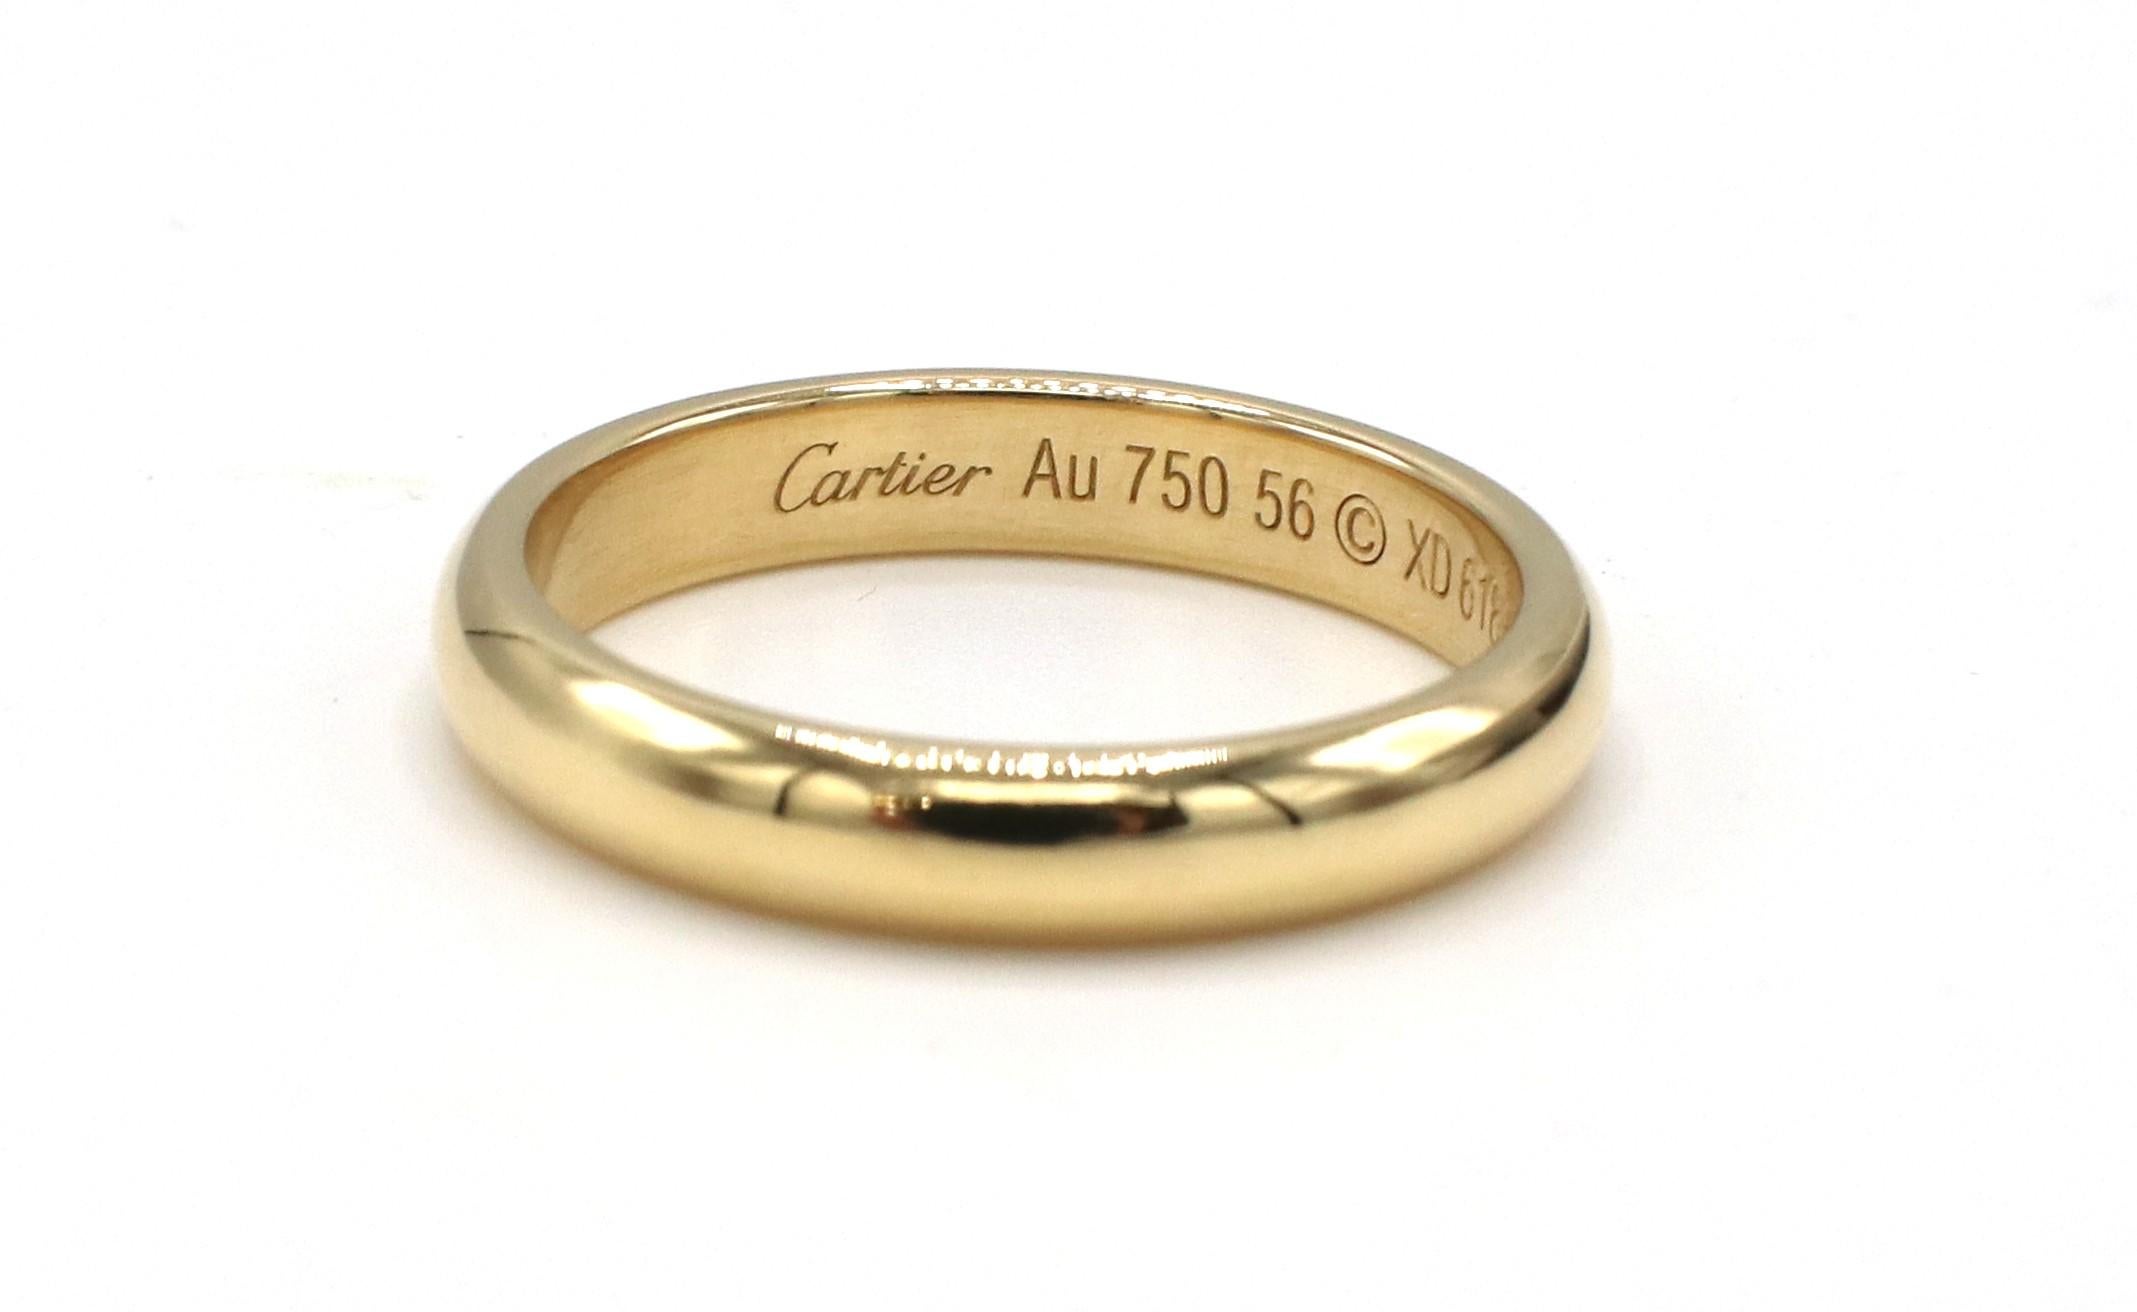 Cartier 1895 Yellow Gold Band Ring 3.5MM
Metal: 18k yellow gold
Weight: 5.19 grams
Width: 3.5mm
Size: 56 (7.5 US)
Notes: Includes papers as pictured
Retail: $1070 USD

